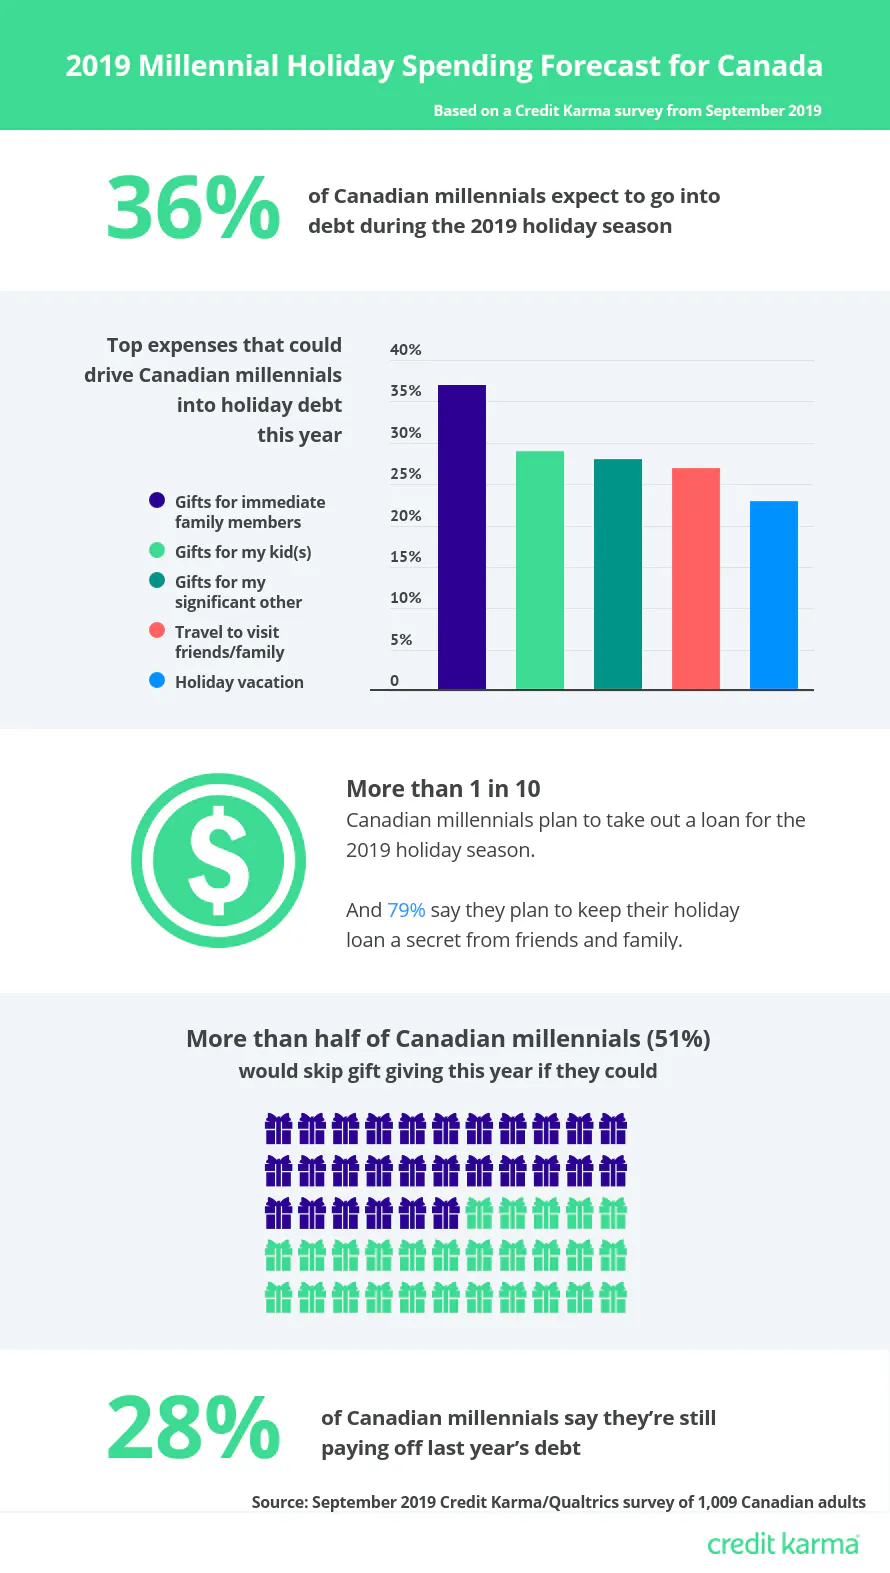 Infographic showing Canadian millennials’ holiday spending habits